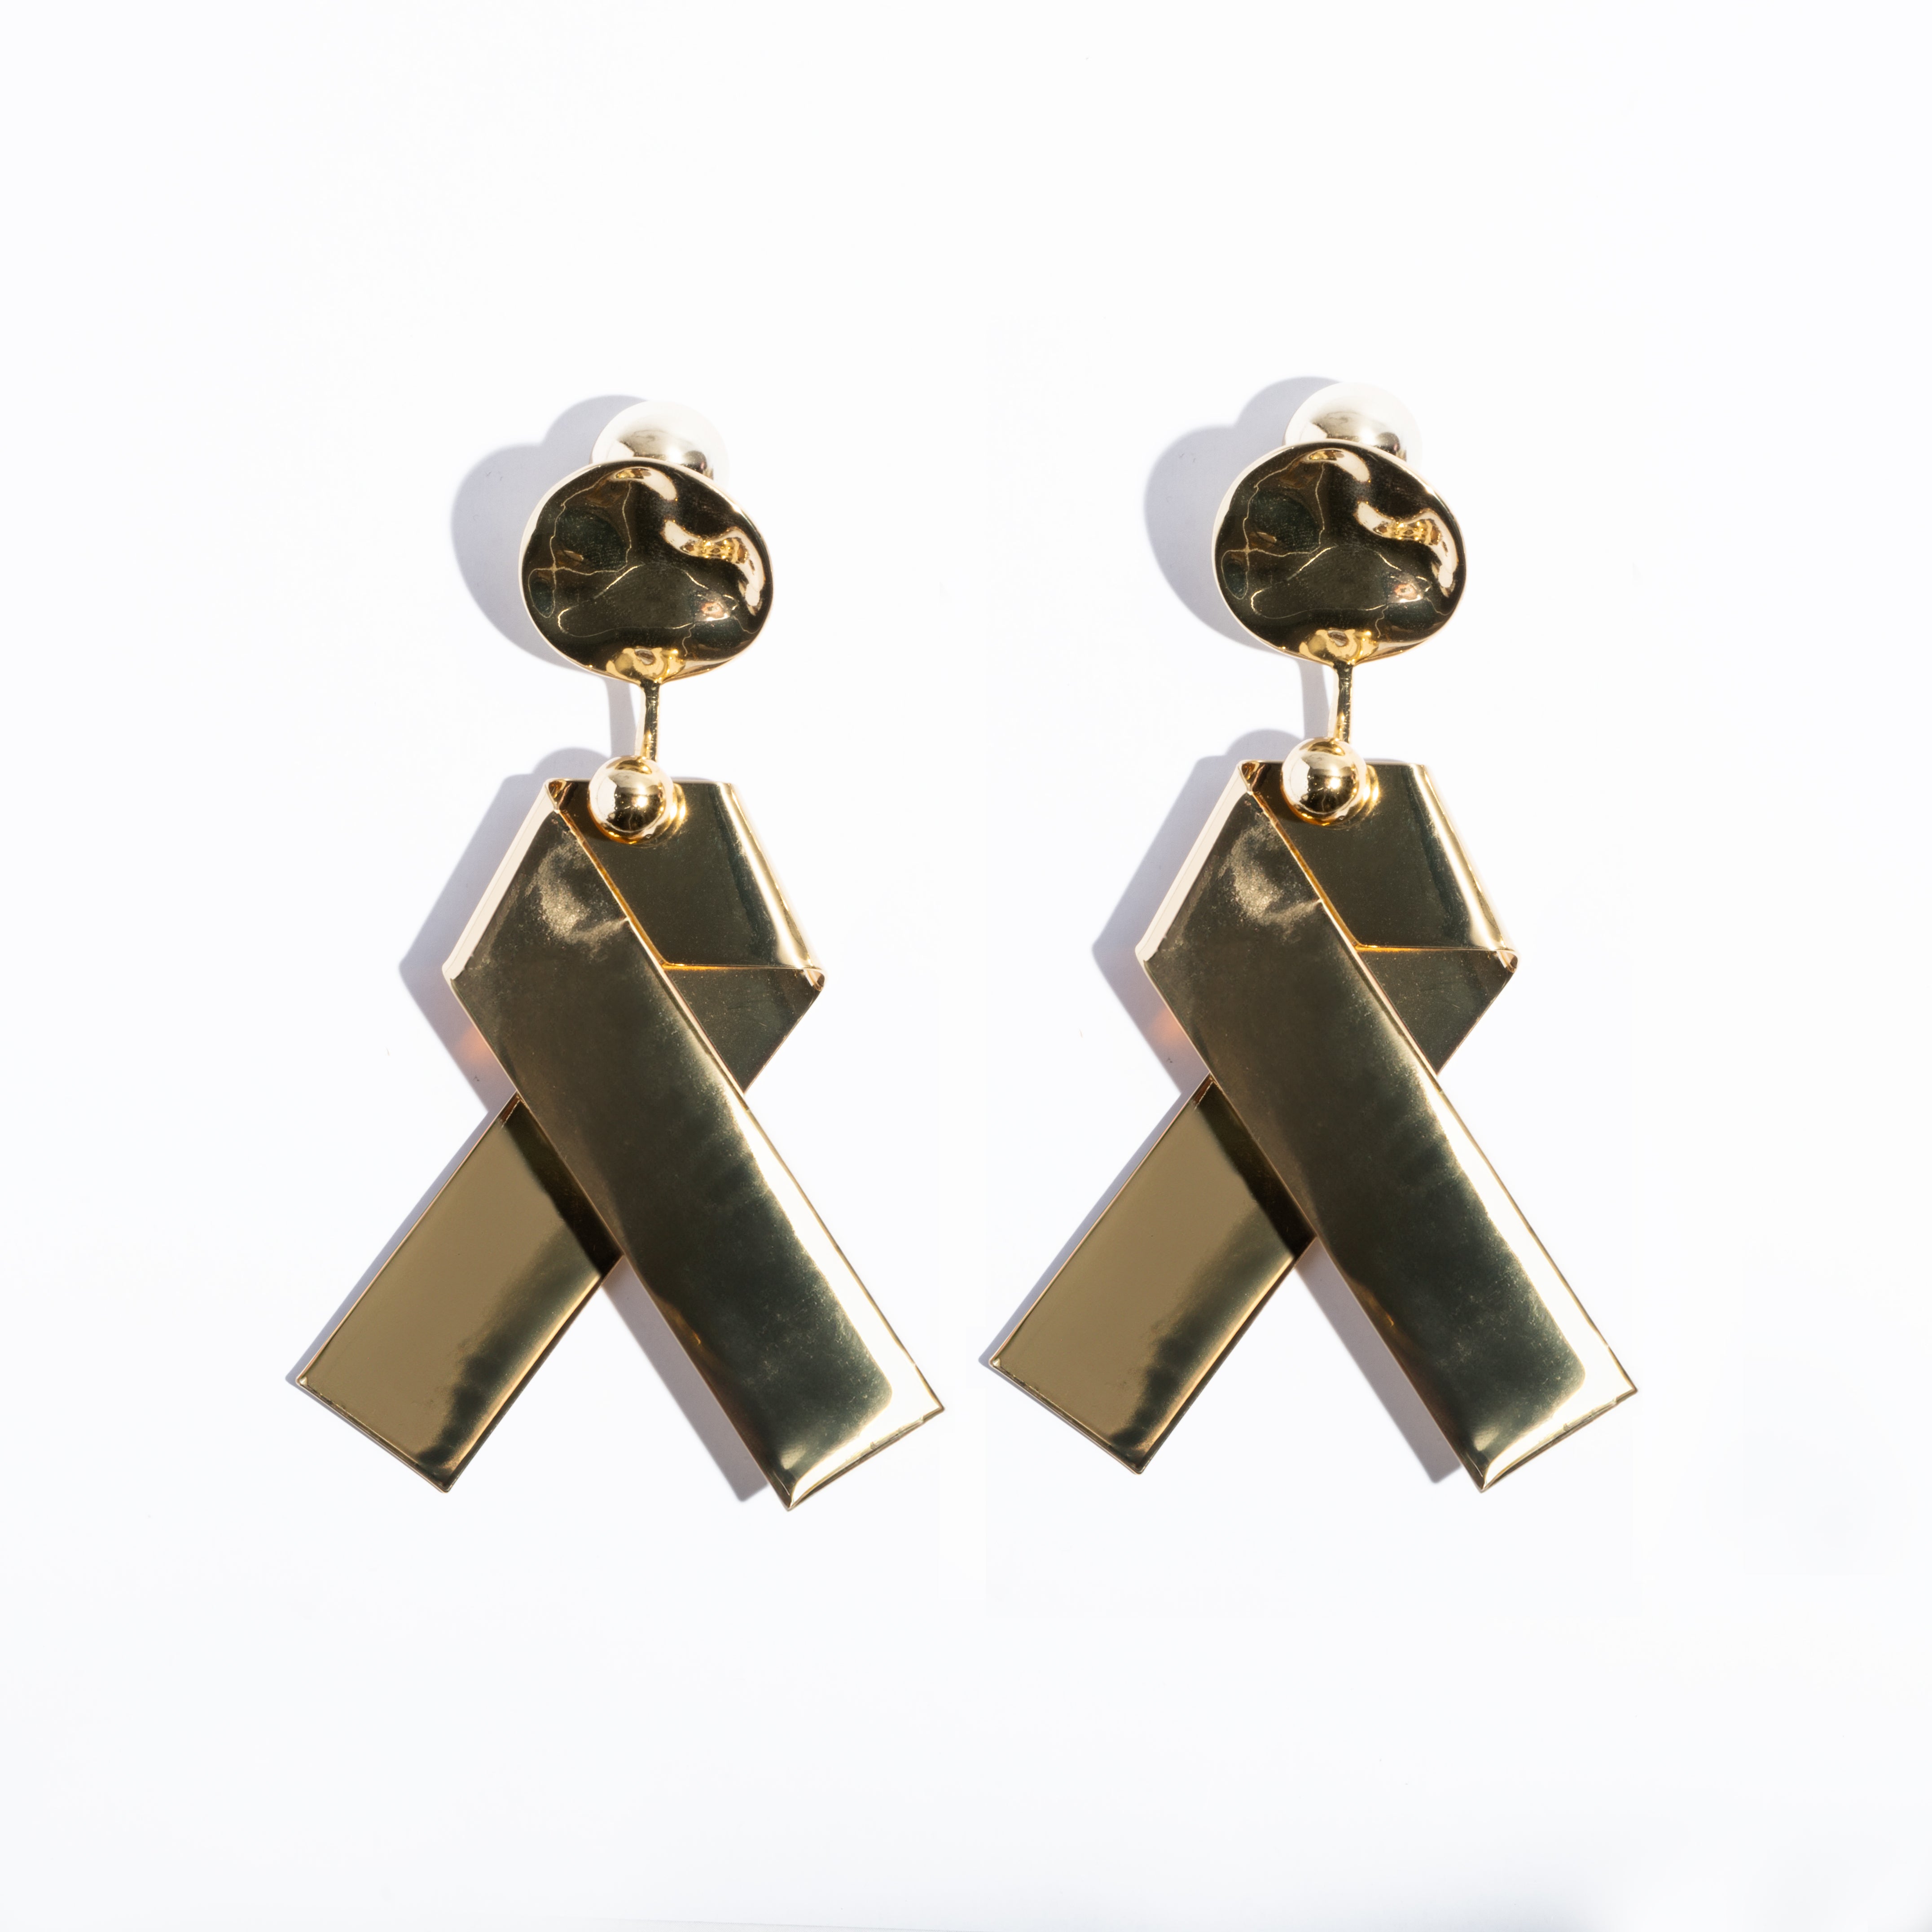 ELEVATED BOW EARRINGS